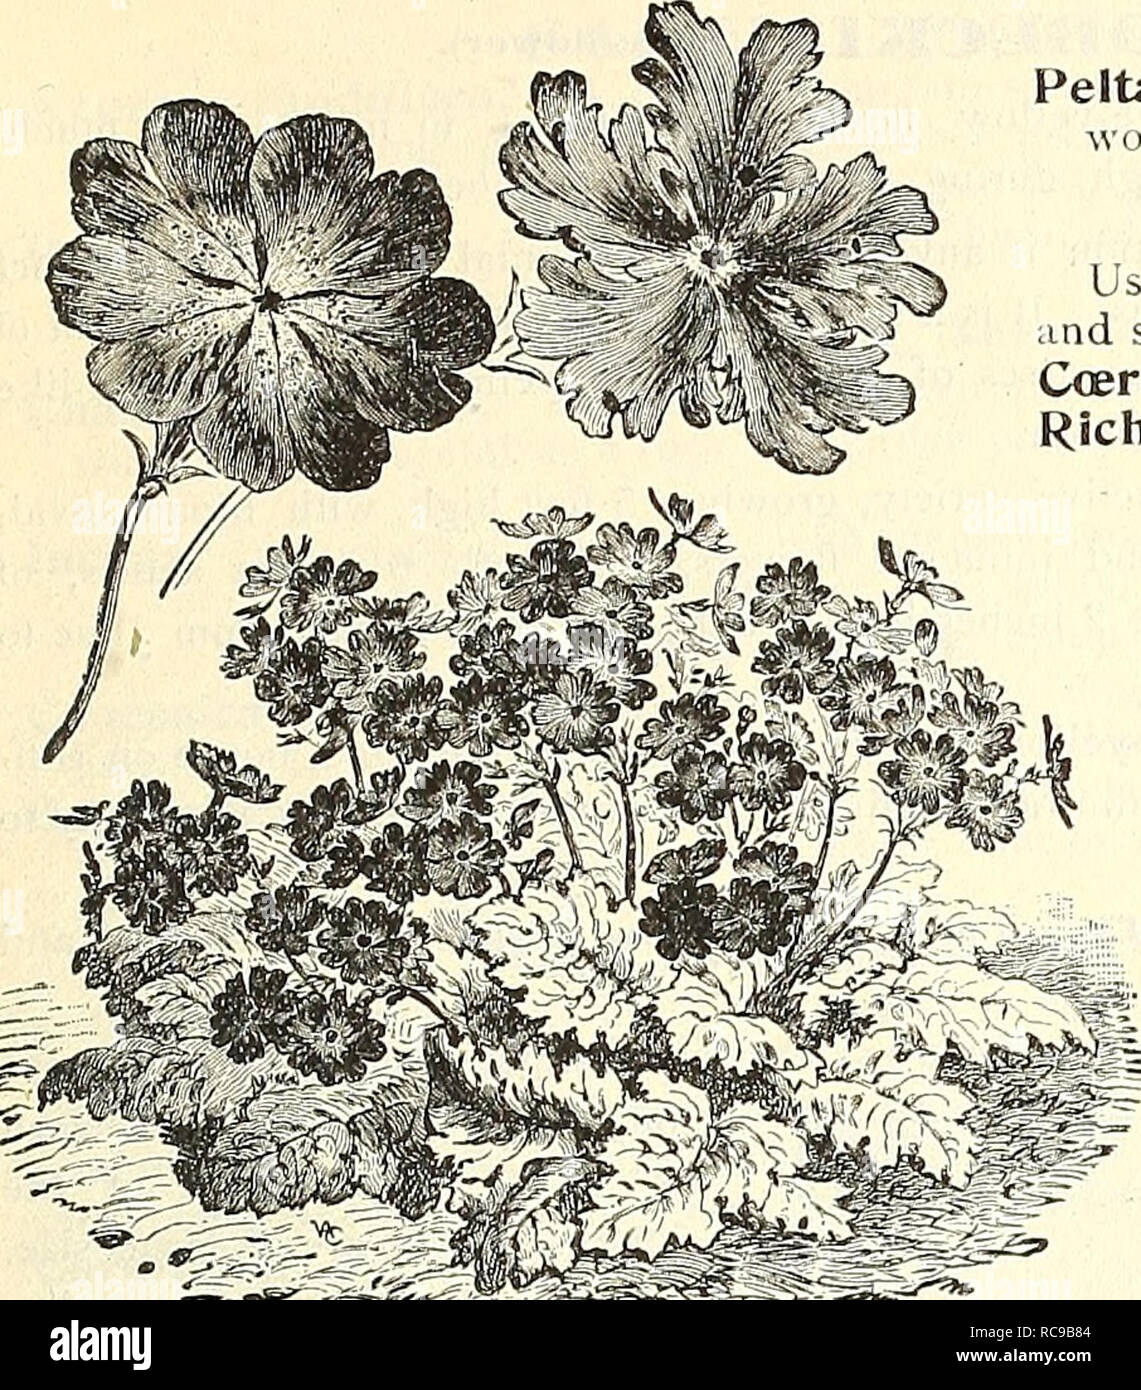 . Dreer's garden book : 1904. Seeds Catalogs; Nursery stock Catalogs; Gardening Equipment and supplies Catalogs; Flowers Seeds Catalogs; Vegetables Seeds Catalogs; Fruit Seeds Catalogs. HmRrADRKR4^HIIAD[LPI1IA-fi-^ HARDY PERfNniAL PbANB 179'. Primula Cortup-oides Siebollii. PRIMUI^A il'iimrose). PODOPHYI^LUM. Peltatum [May Apple, or Aliuidrake). A well-known naUve plant which is worthy of a place in every shady border. 10 ct-^. each; $1.00 per doz. POLrEMONIUM (Jacob'.s Ladder). Useful border plants, about 12 inches high, with deep green finely-cut foliage ind spikes of showy flowers during J Stock Photo